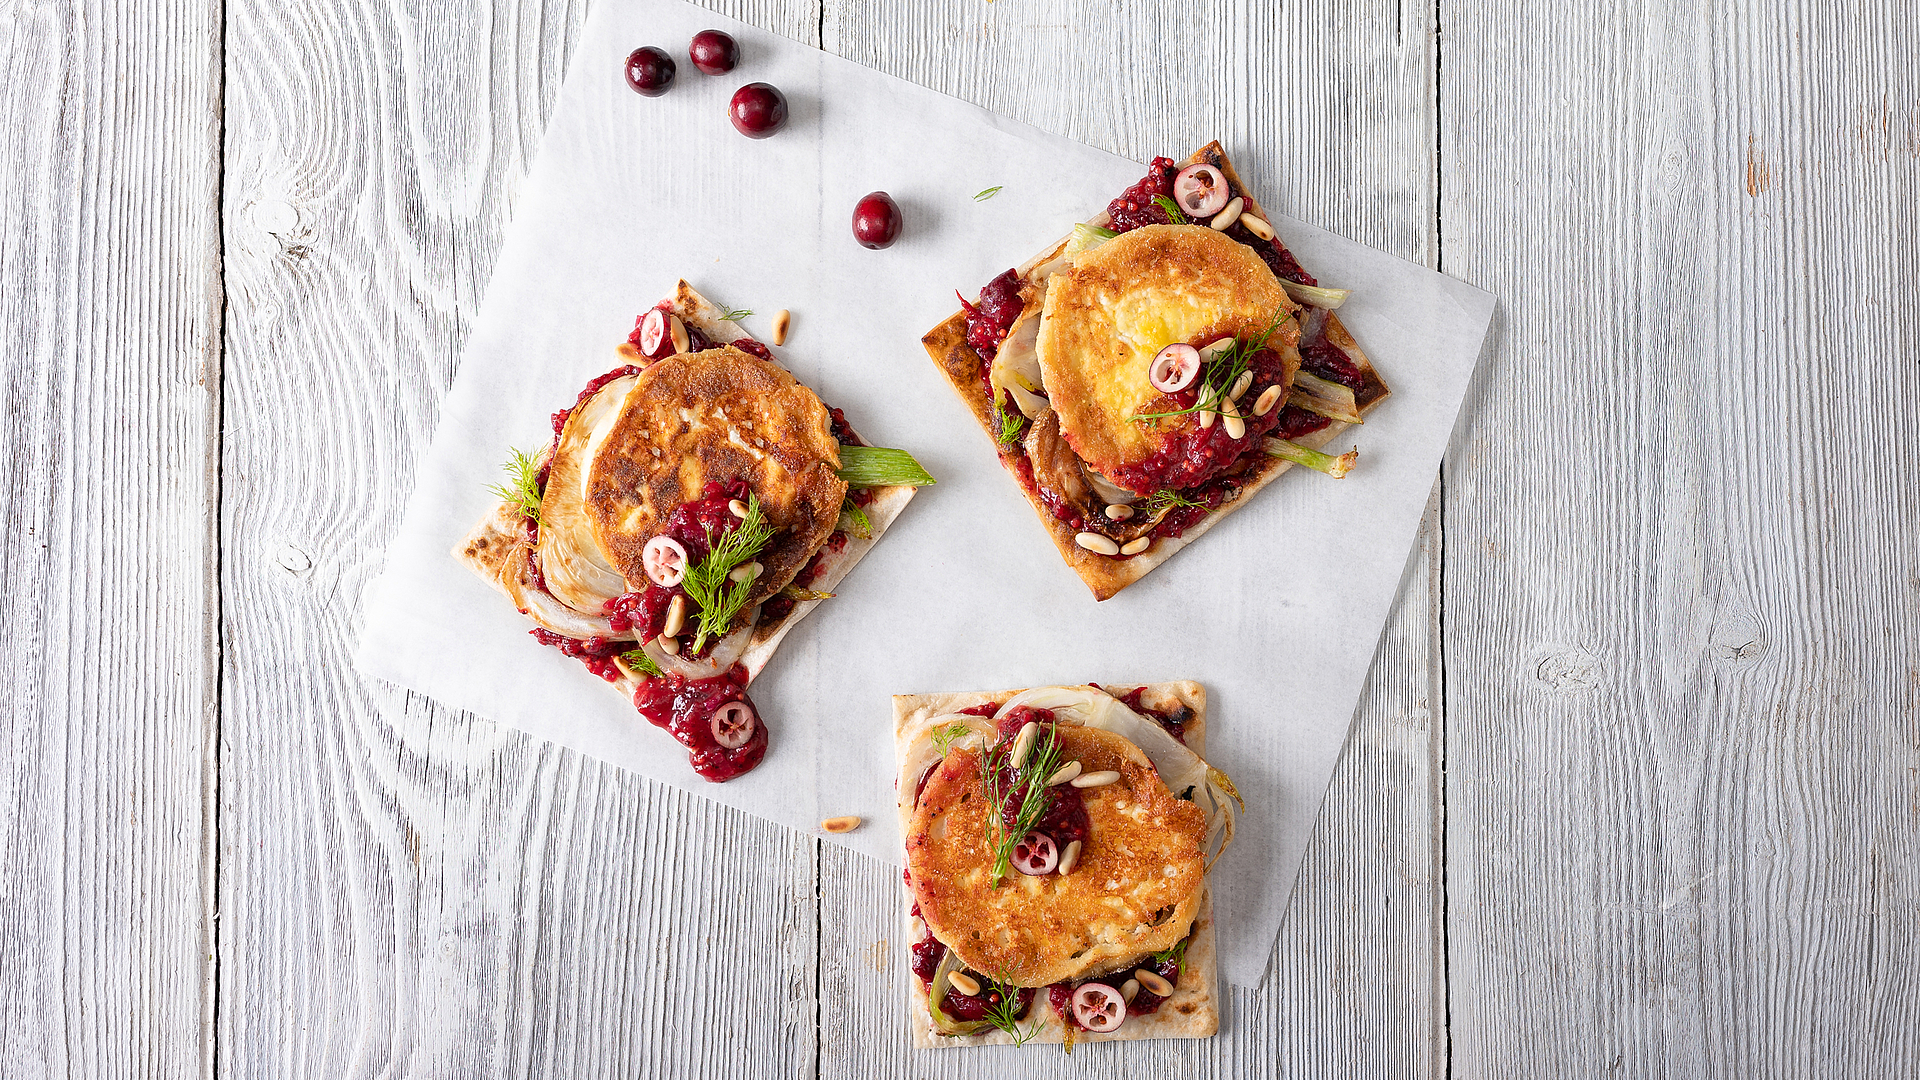 Tartelettes with goats’ cheese, fennel and cranberry chutney 